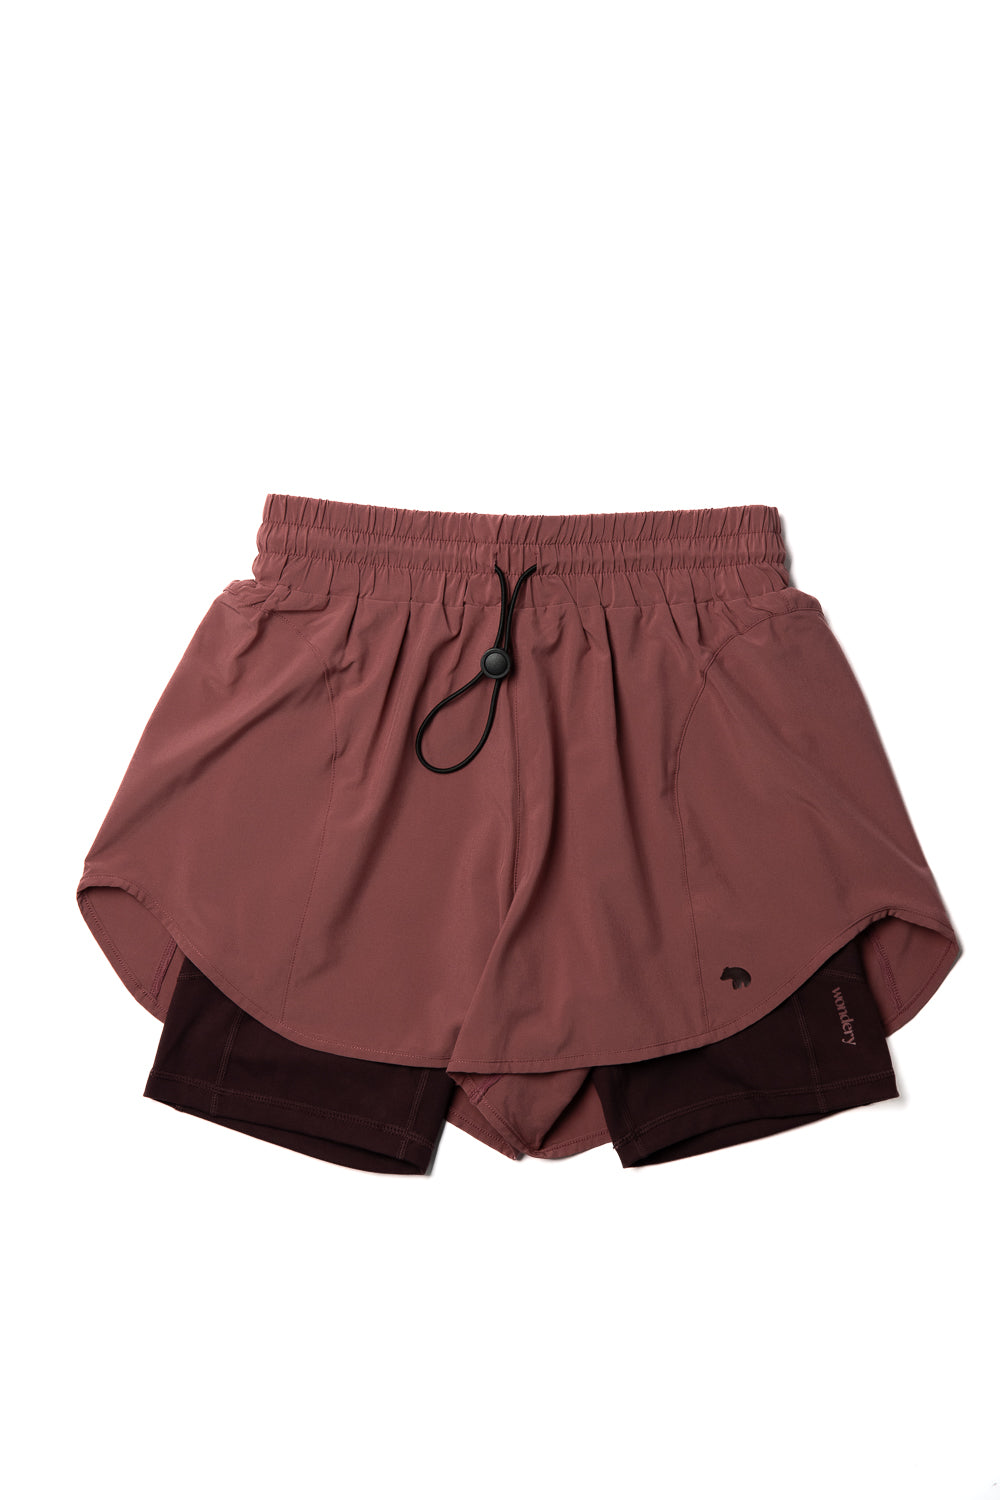 #color_dusty rose/mauve _burgundy pink lightweight running shorts and biker shorts with side pocket and elastic waistband